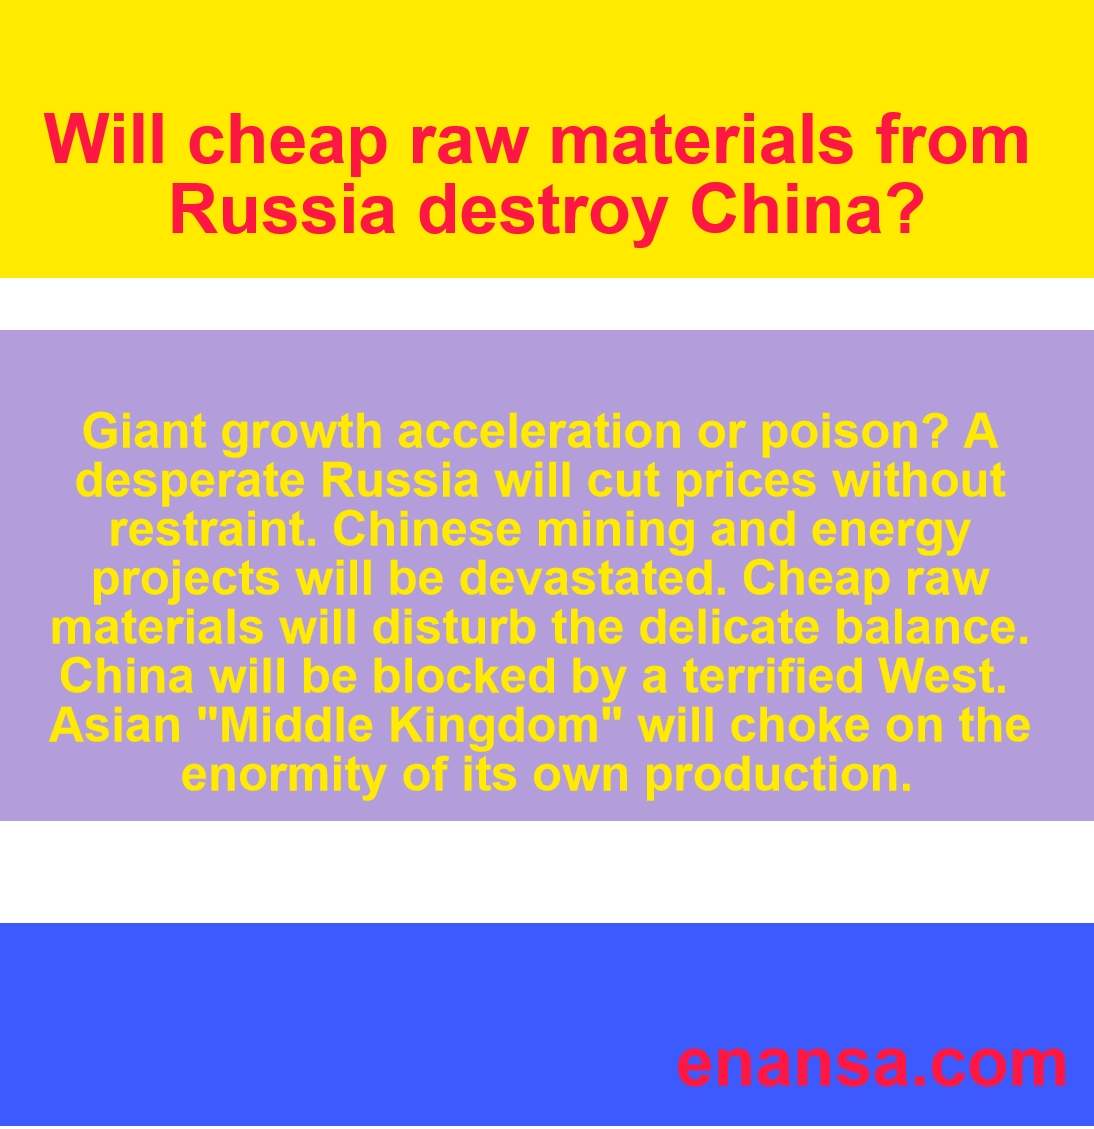 Will cheap raw materials from Russia destroy China?